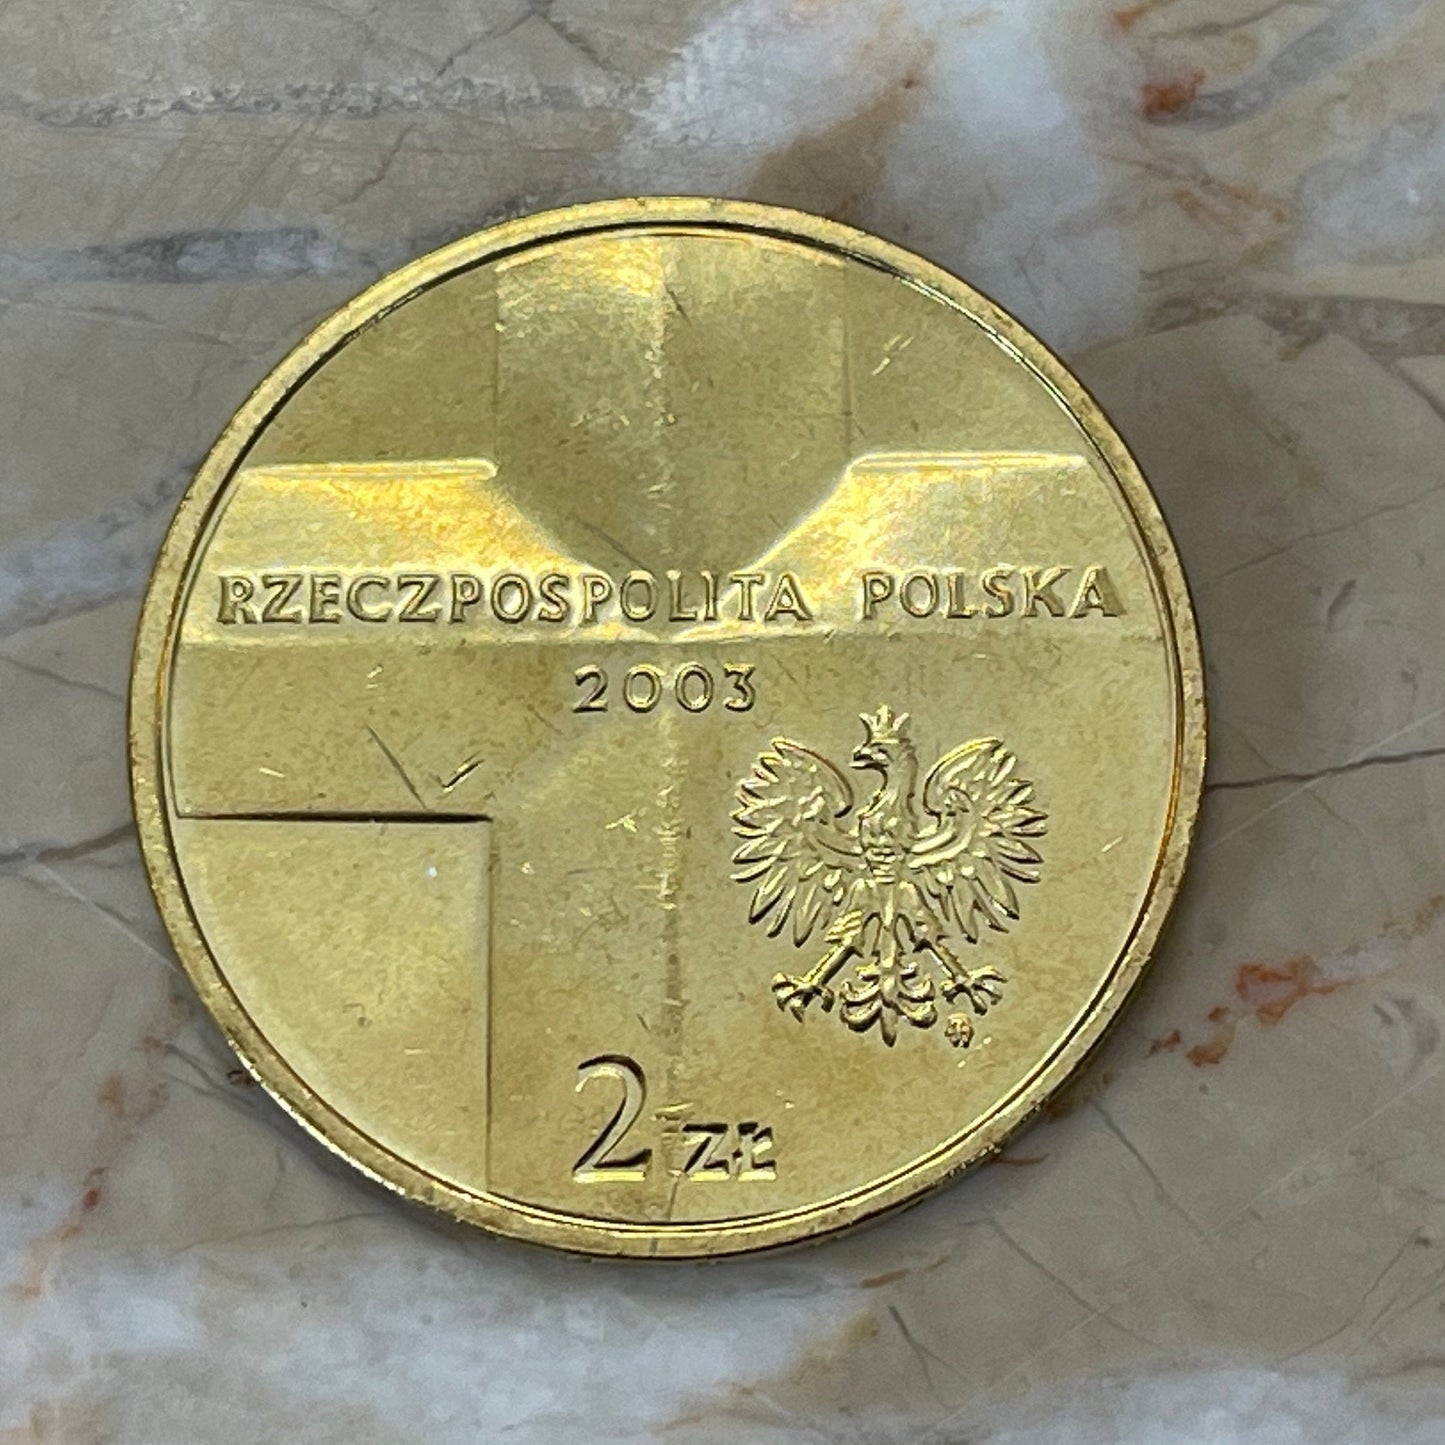 Pope John Paul II 25th Anniversary Poland 2 Zlote Authentic Coin Money for Jewelry and Craft Making